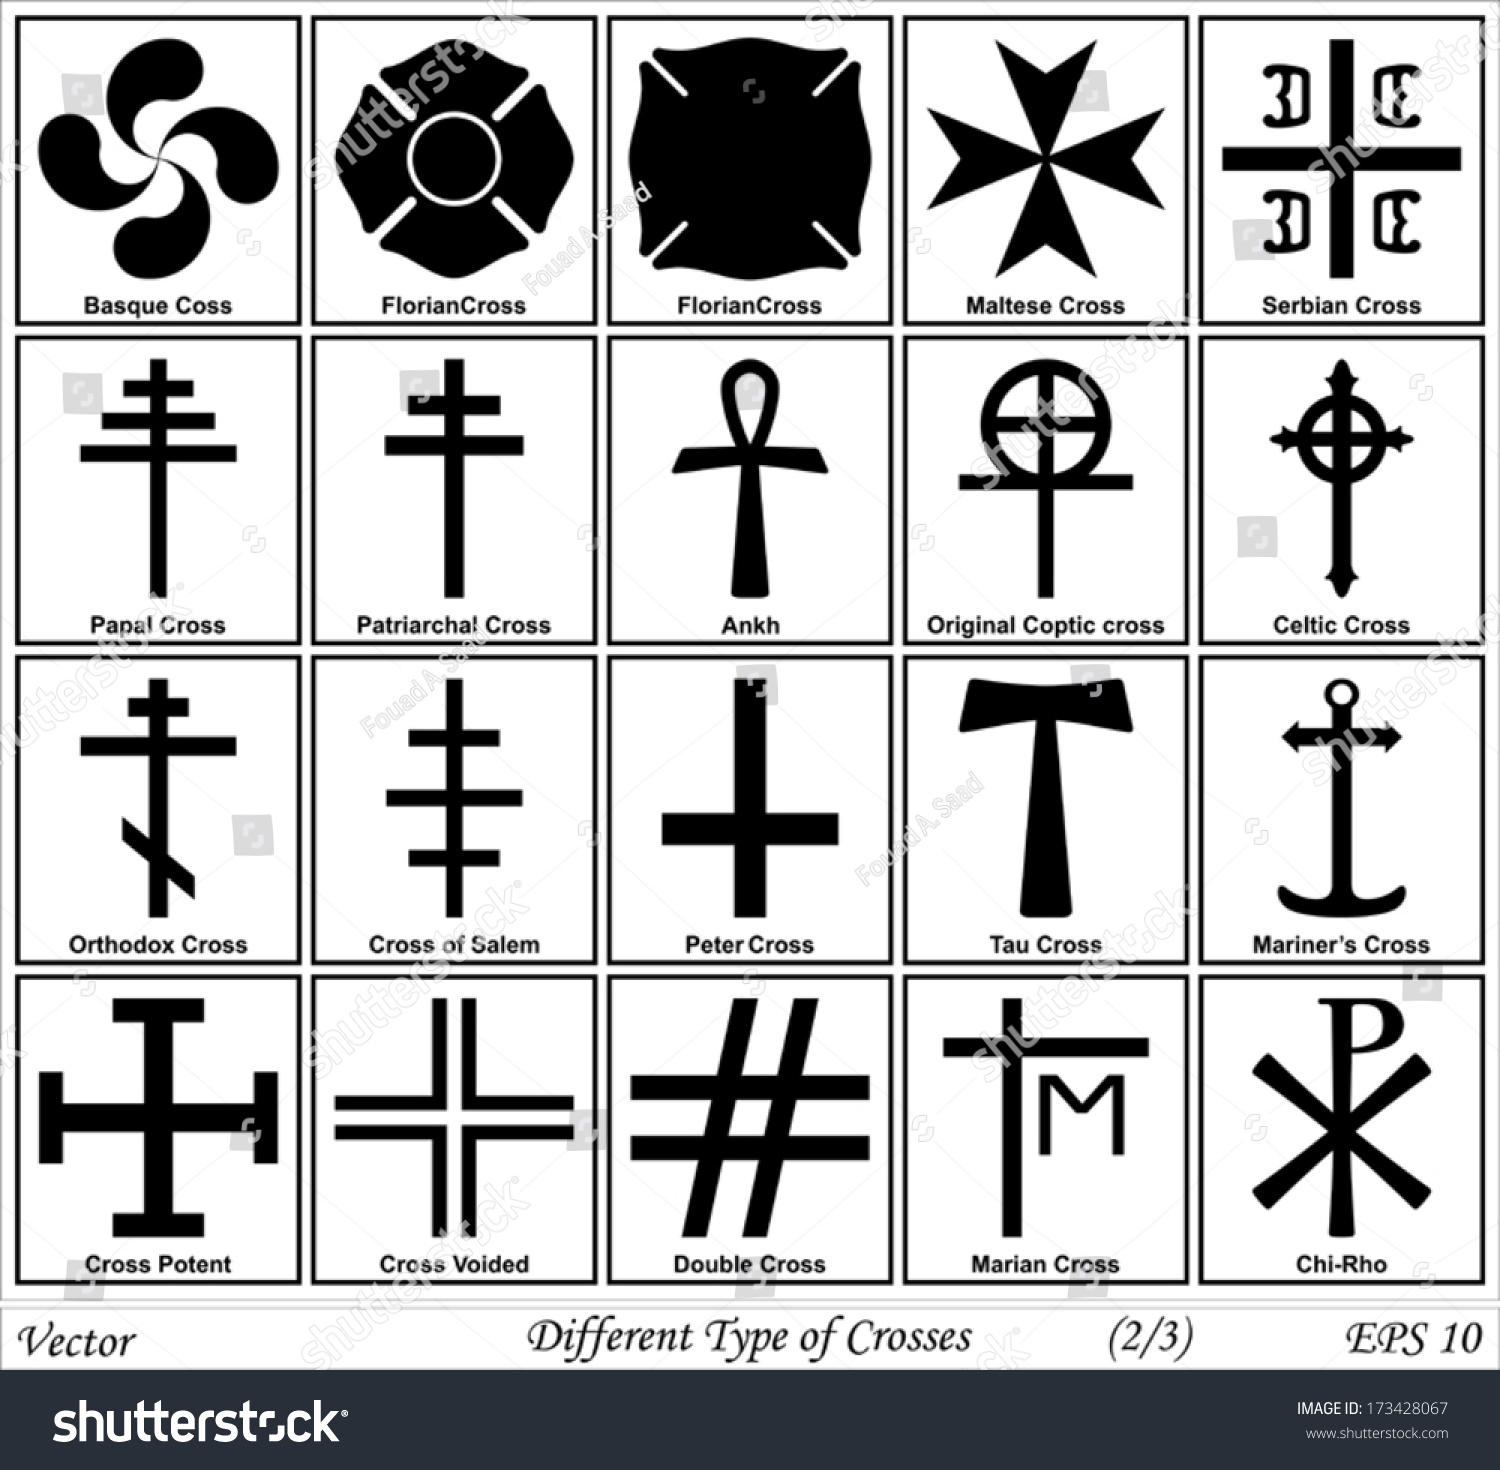 List 104+ Images different types of crosses and their meanings Sharp